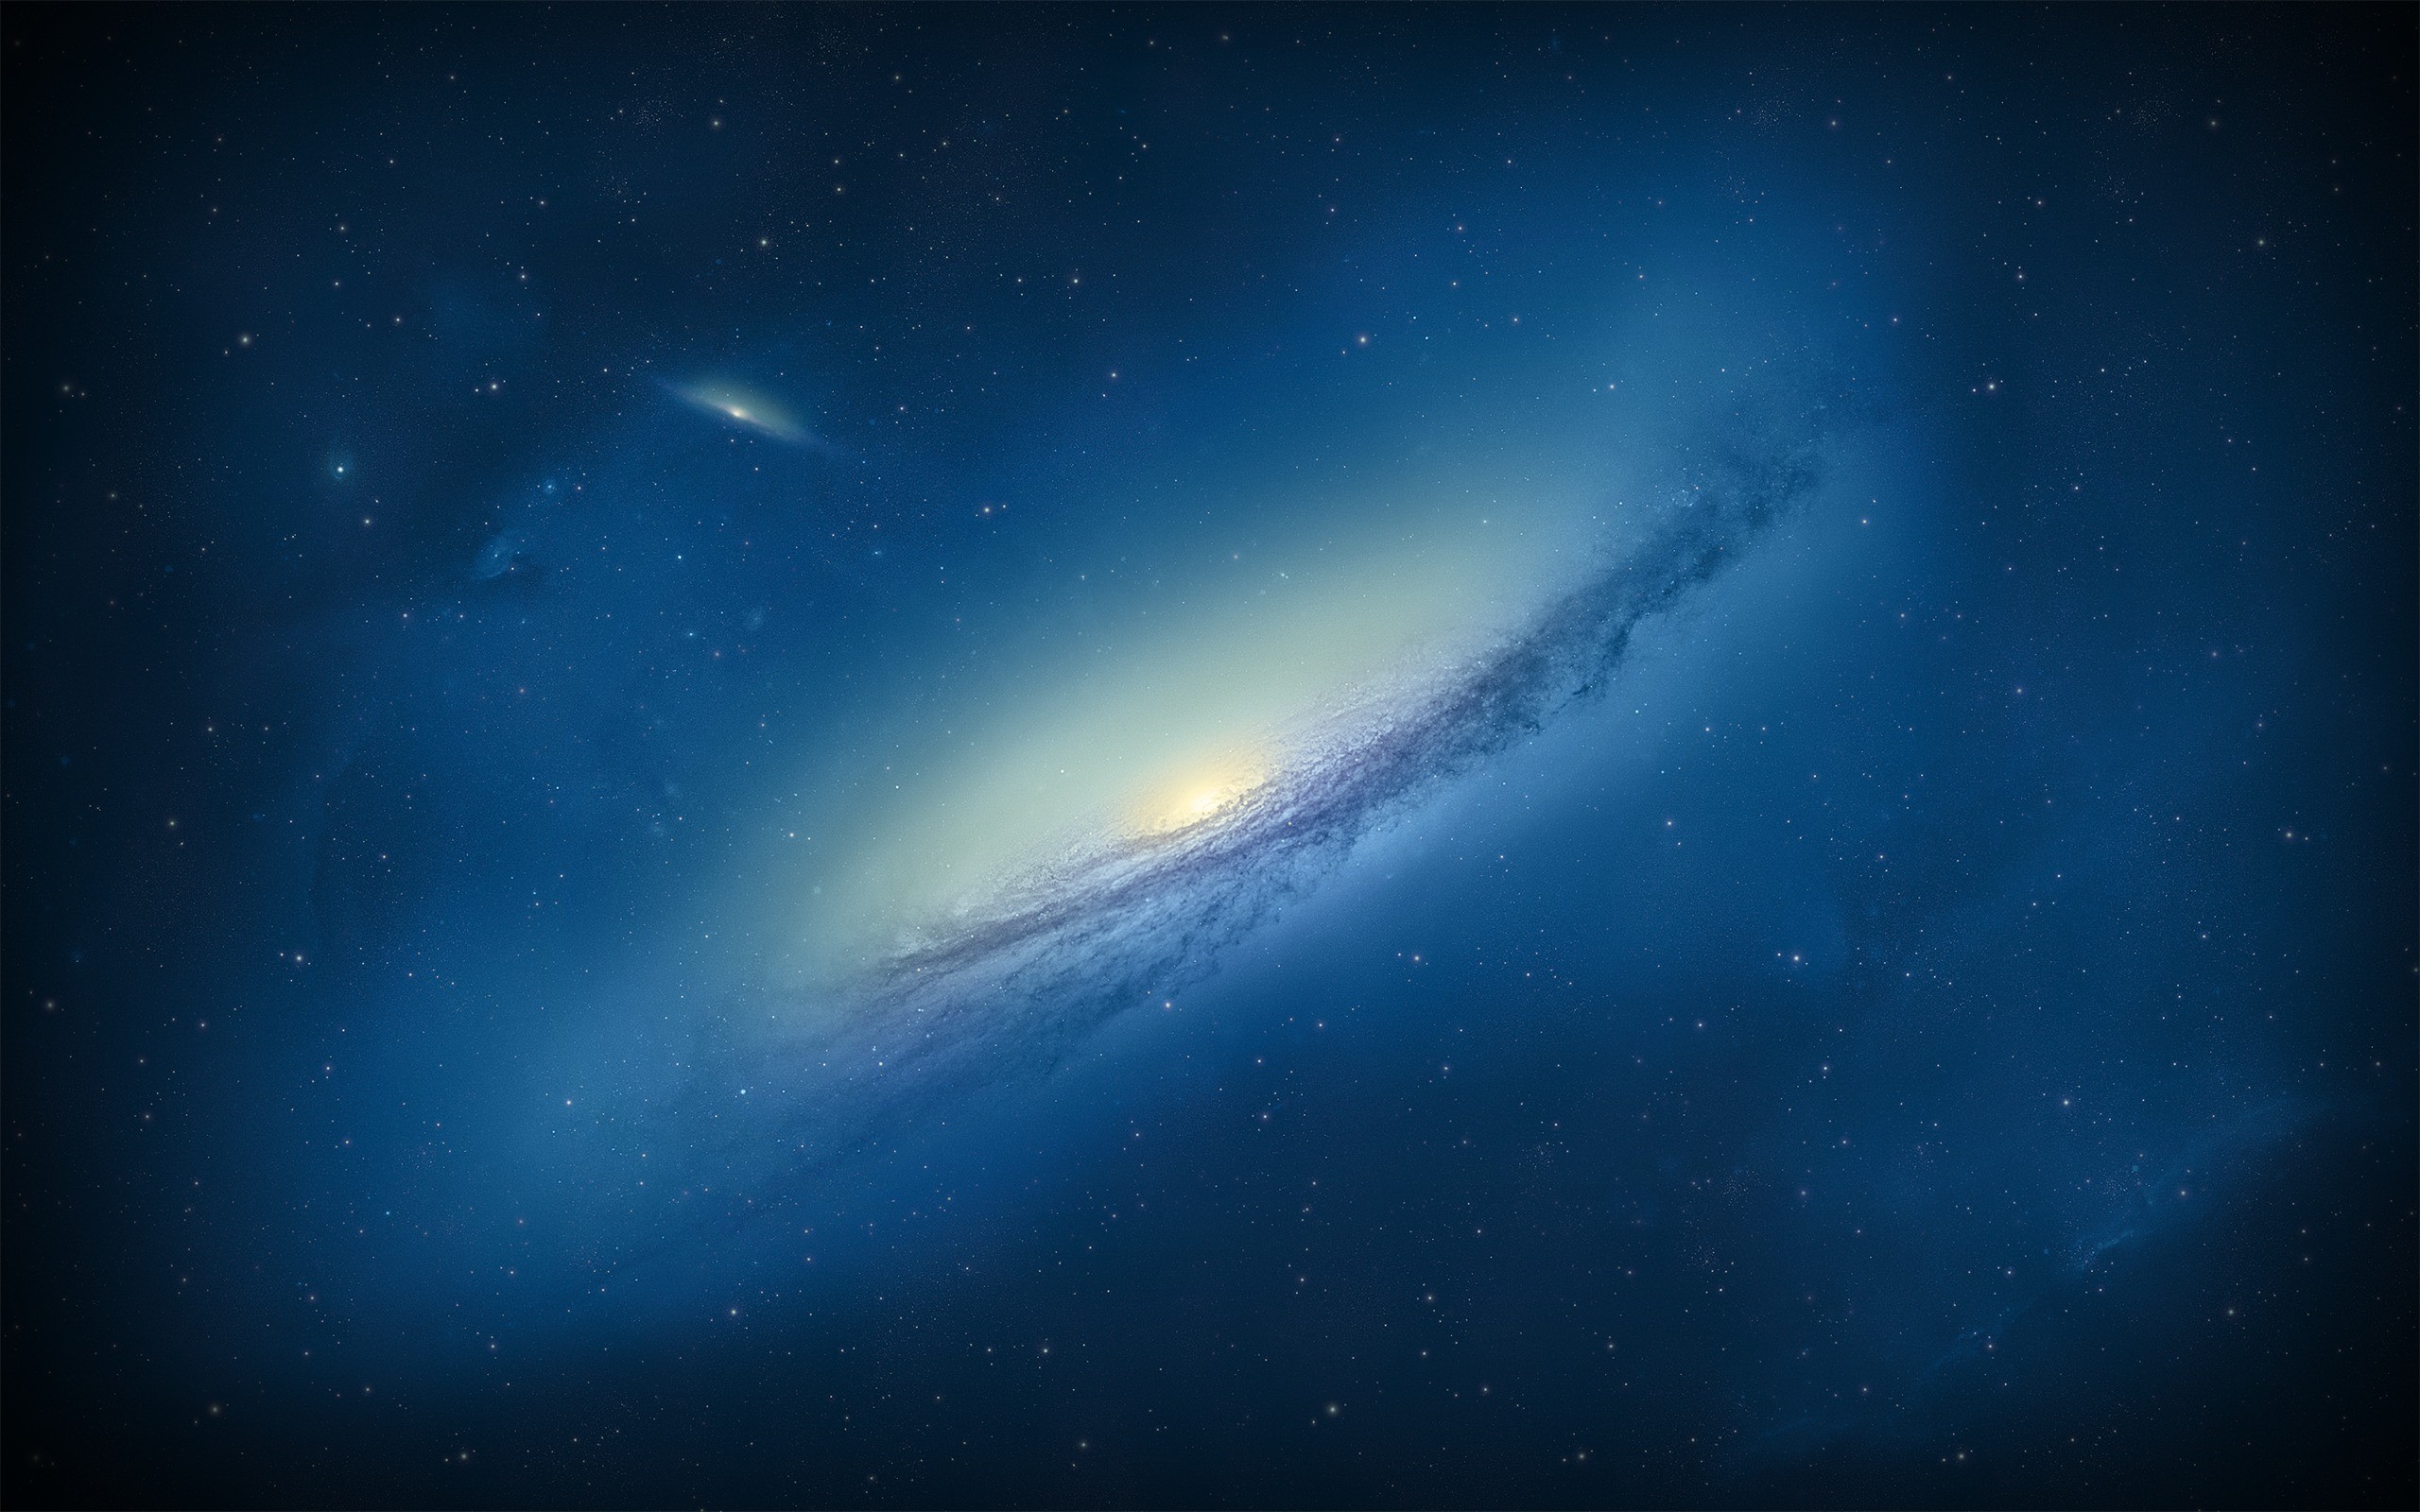 Blue Galaxy Wallpaper Premium space wallpapers by ChrisFR06